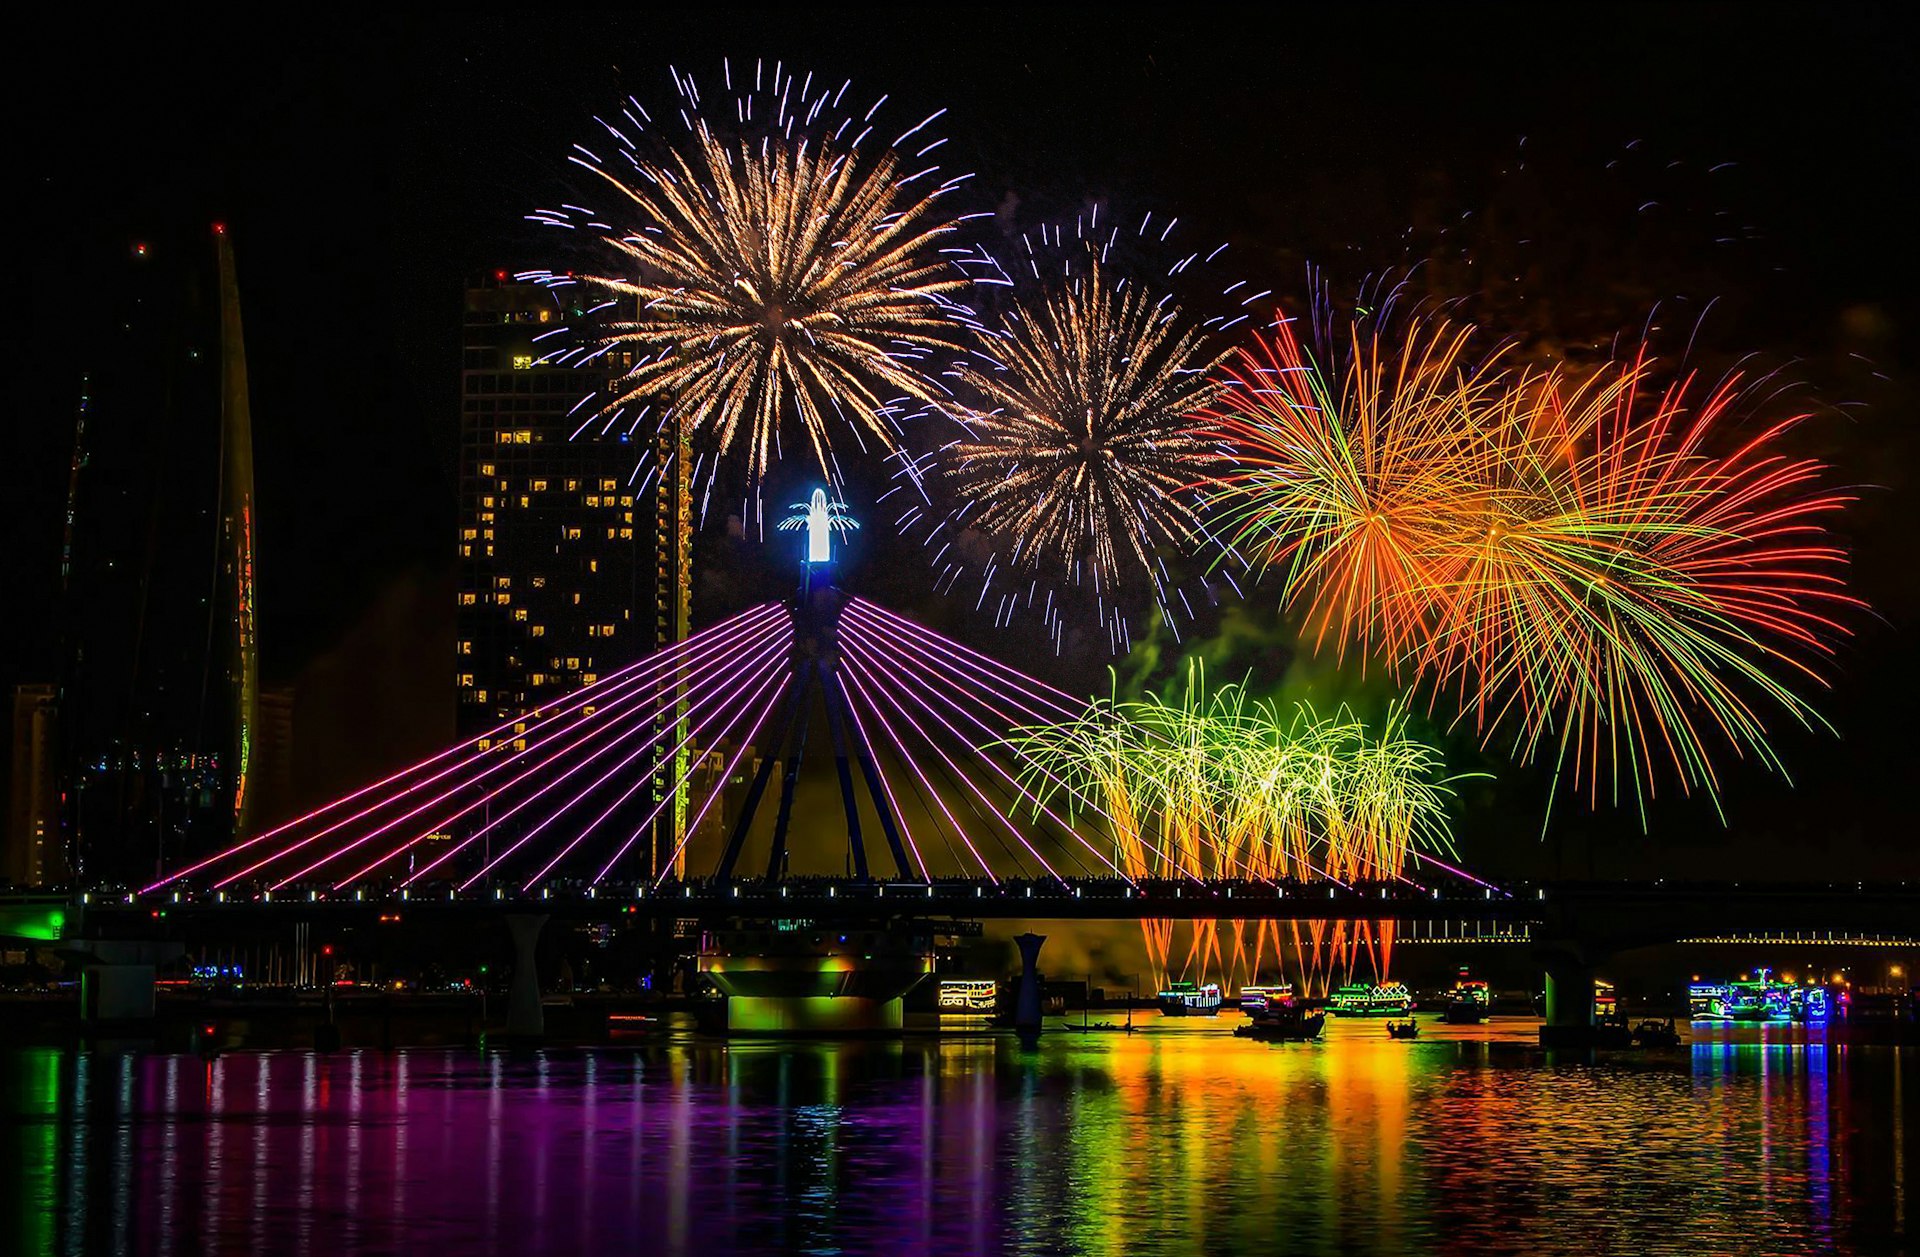 Colorful fireworks illuminate the night sky above the Han River in Danang, Vietnam.